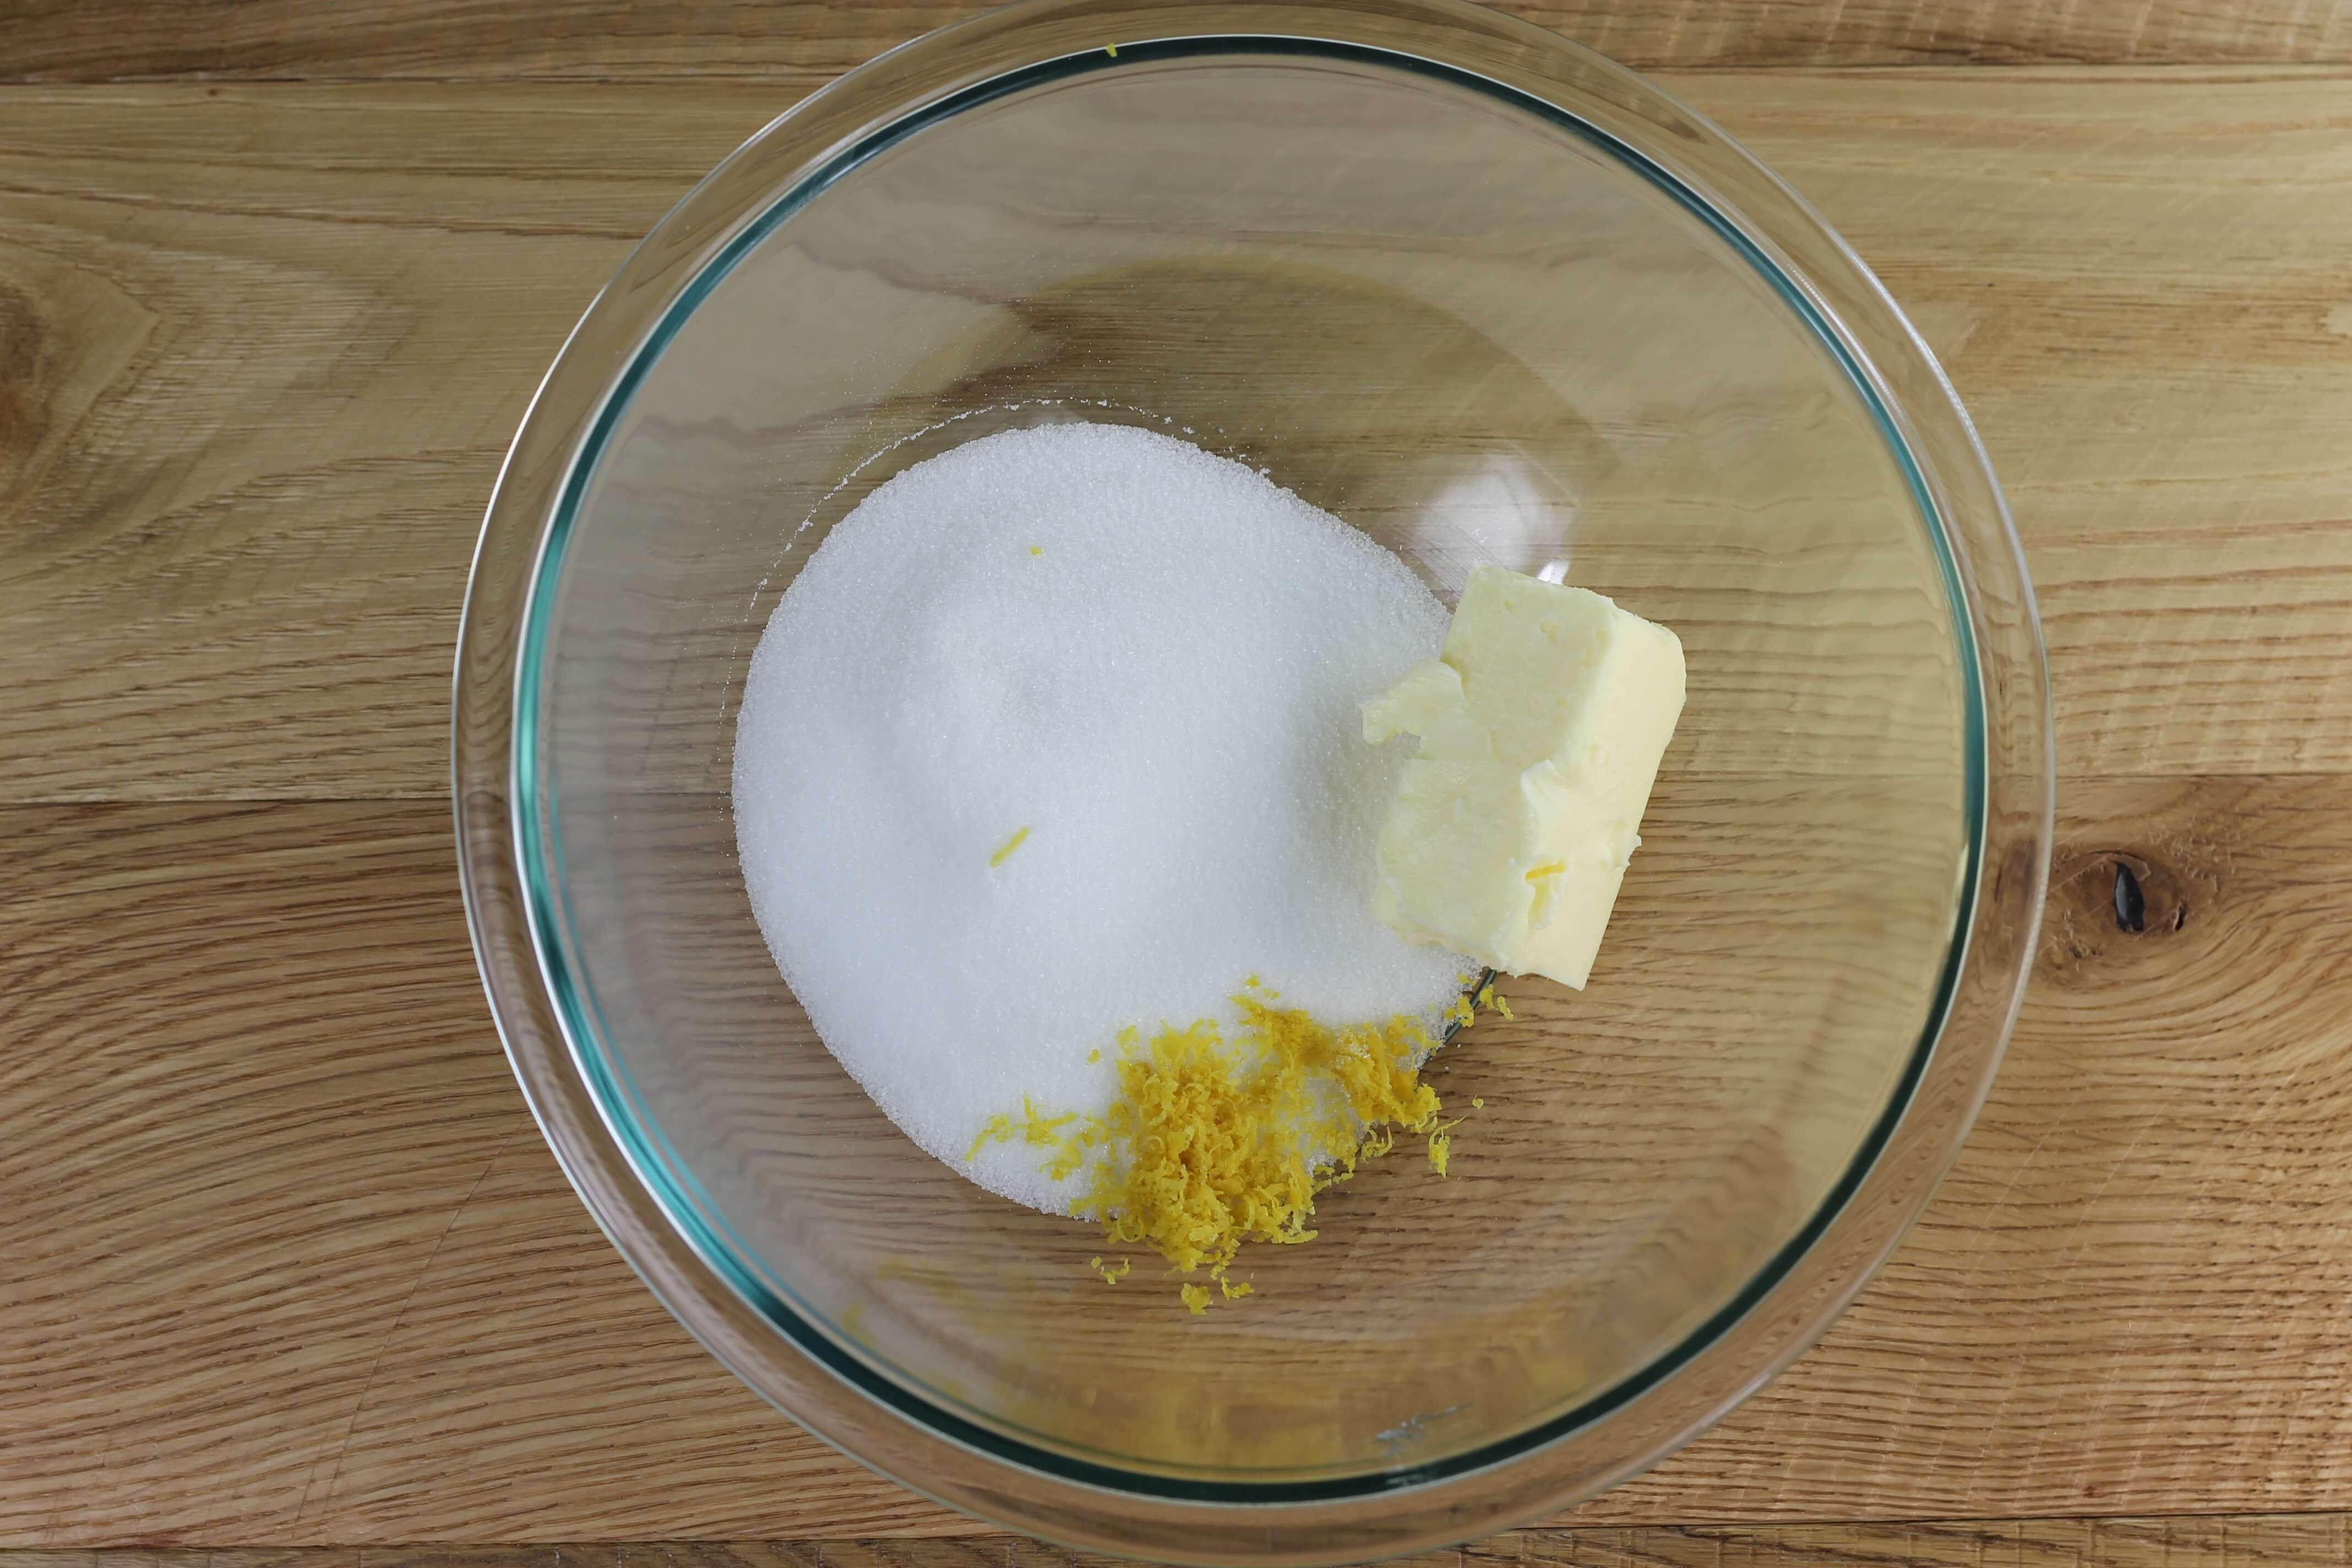 Sugar, butter, and lemon zest in a glass bowl.